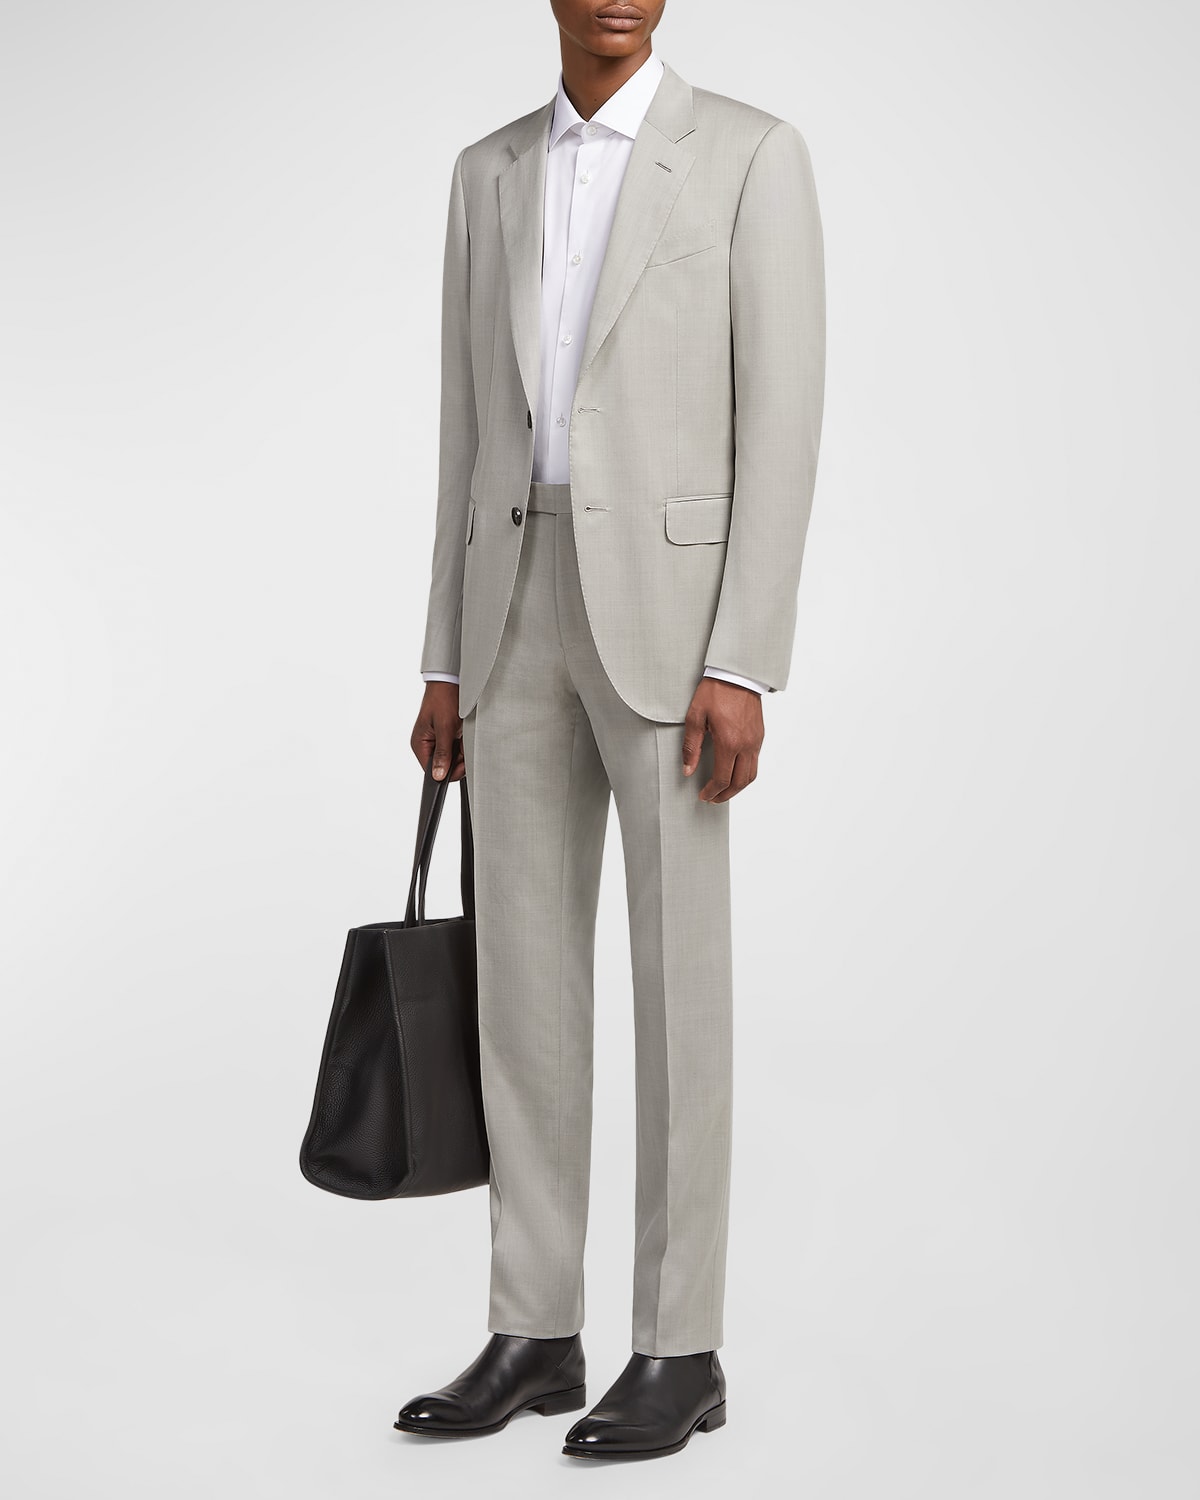 Zegna Taupe Centoventimila Wool Suit